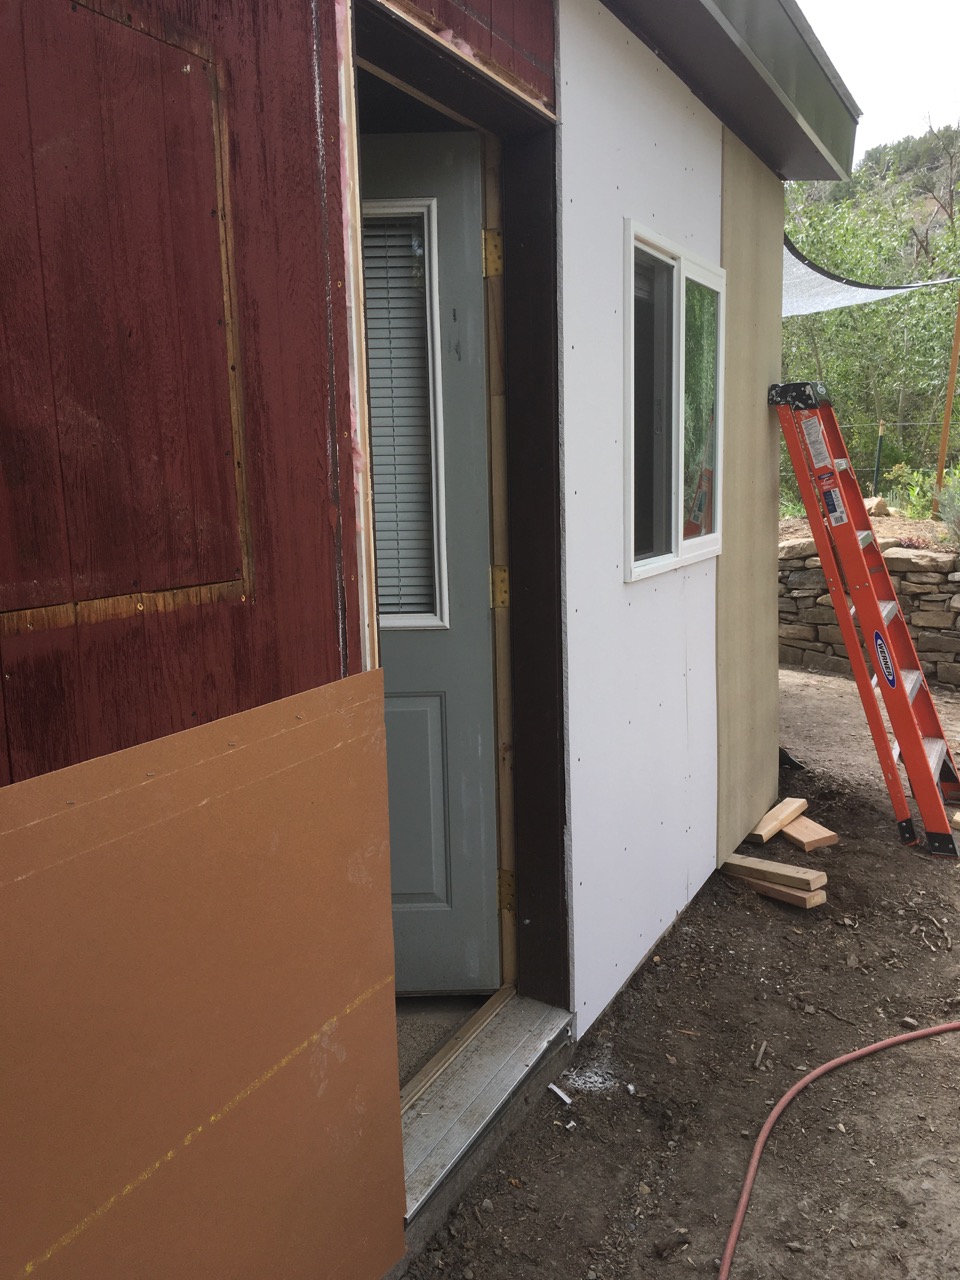 Water proofing, insulating, and siding walls